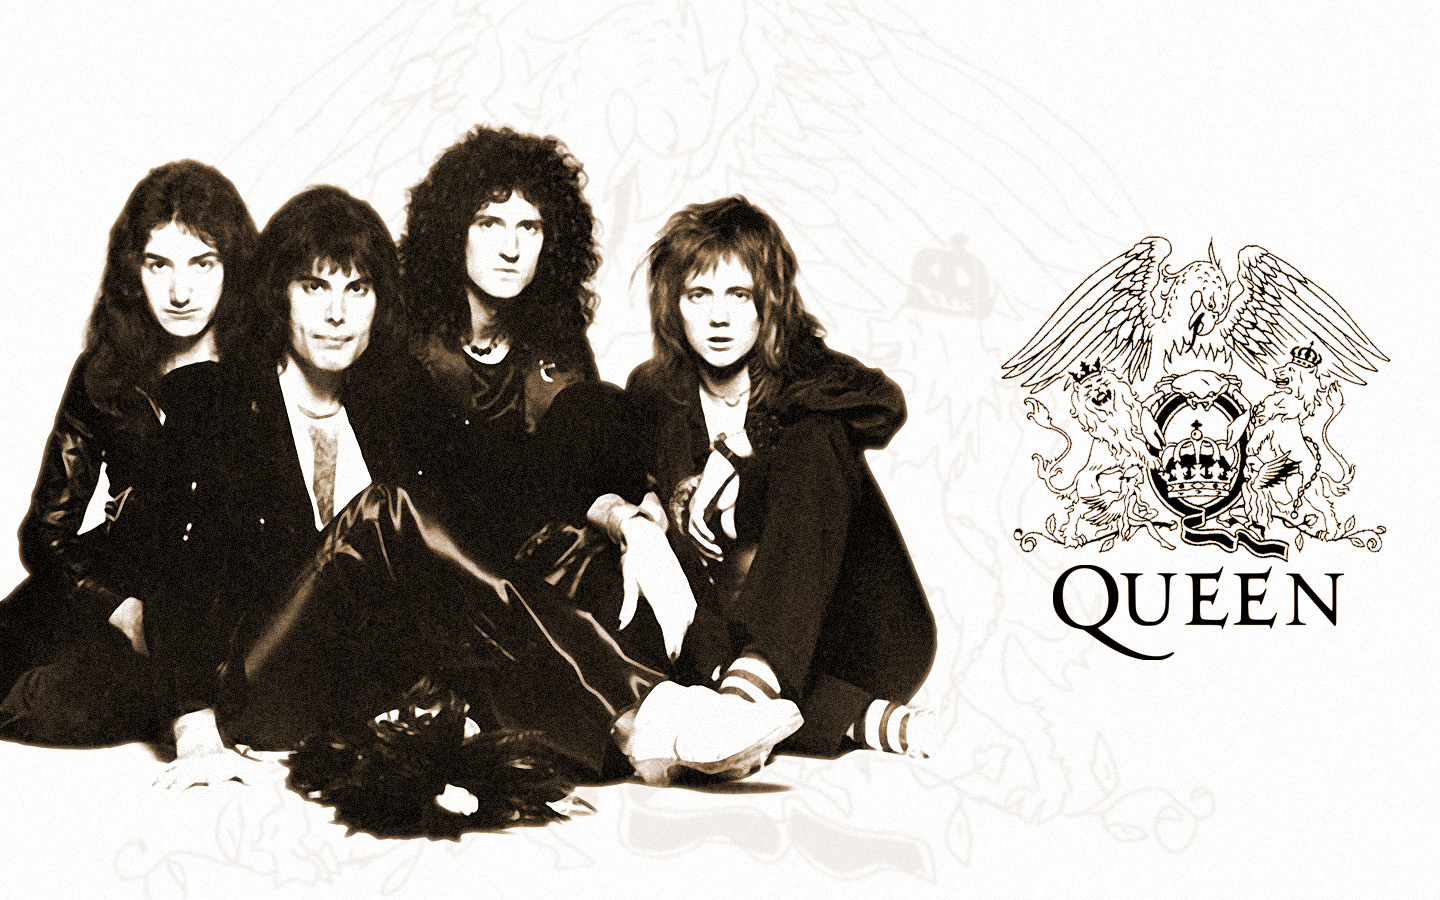 Rock Band Wallpapers The Greatest Band quotQueenquot Wallpaper